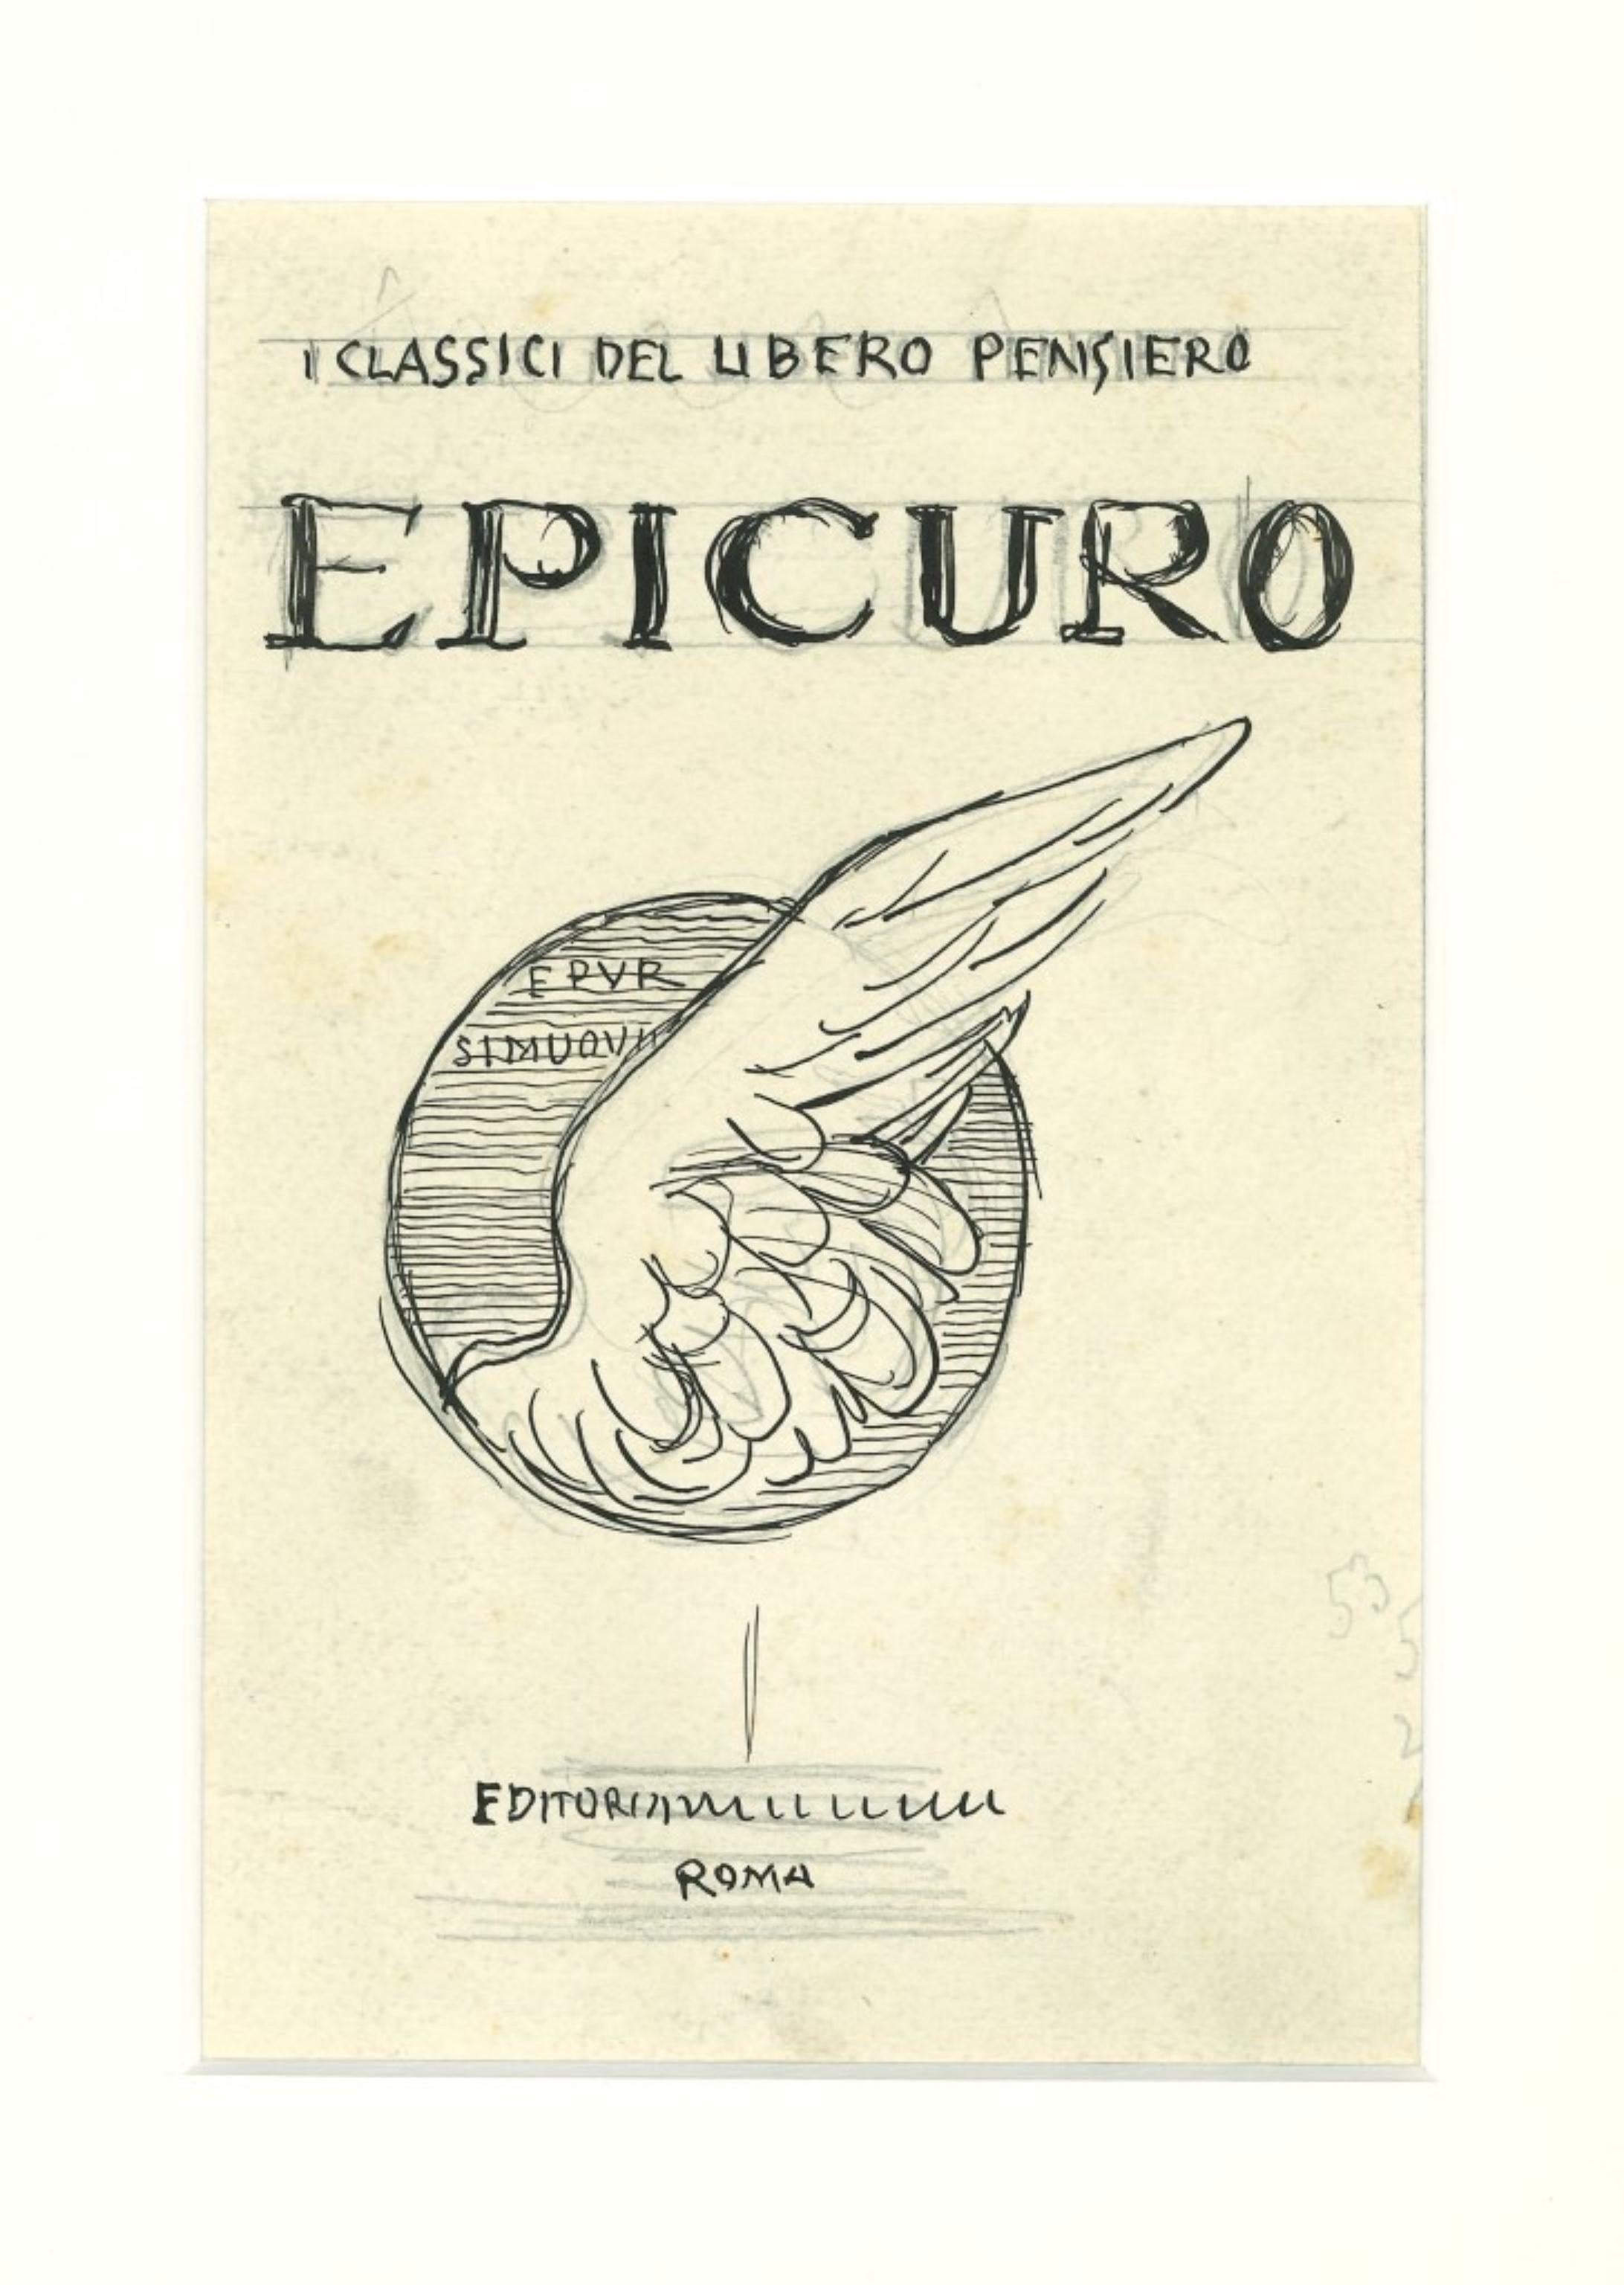 Epicuro is an original drawing in china ink realized as study for a book cover by Gabriele Galantara The state of preservation of the artwork is good.

This artwork represents a central synonym with bird wings.

On the top center there is an